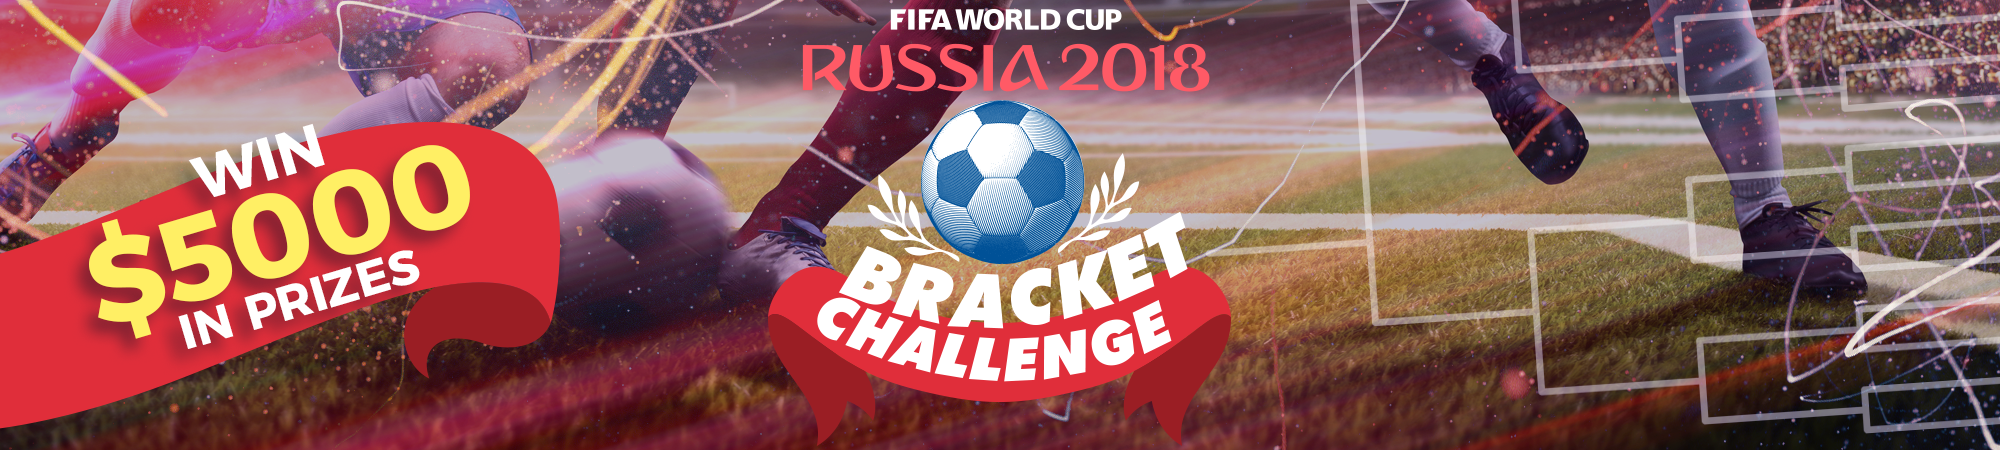 World Cup Bracket Contest at YouWager.eu